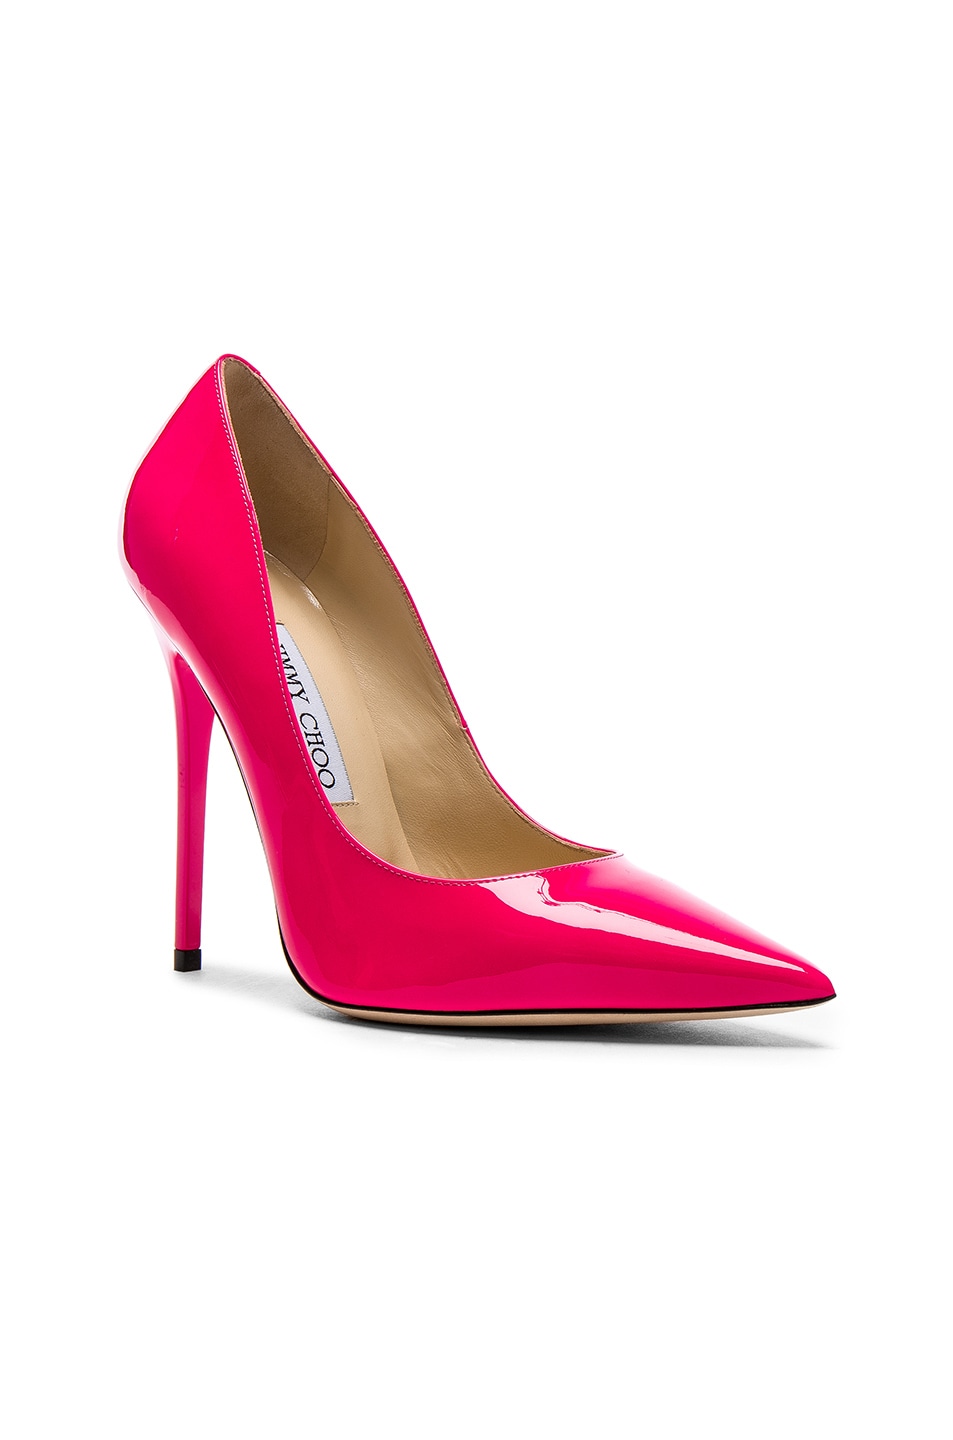 JIMMY CHOO Neon Patent Leather Anouk Heels in Shocking Pink | ModeSens